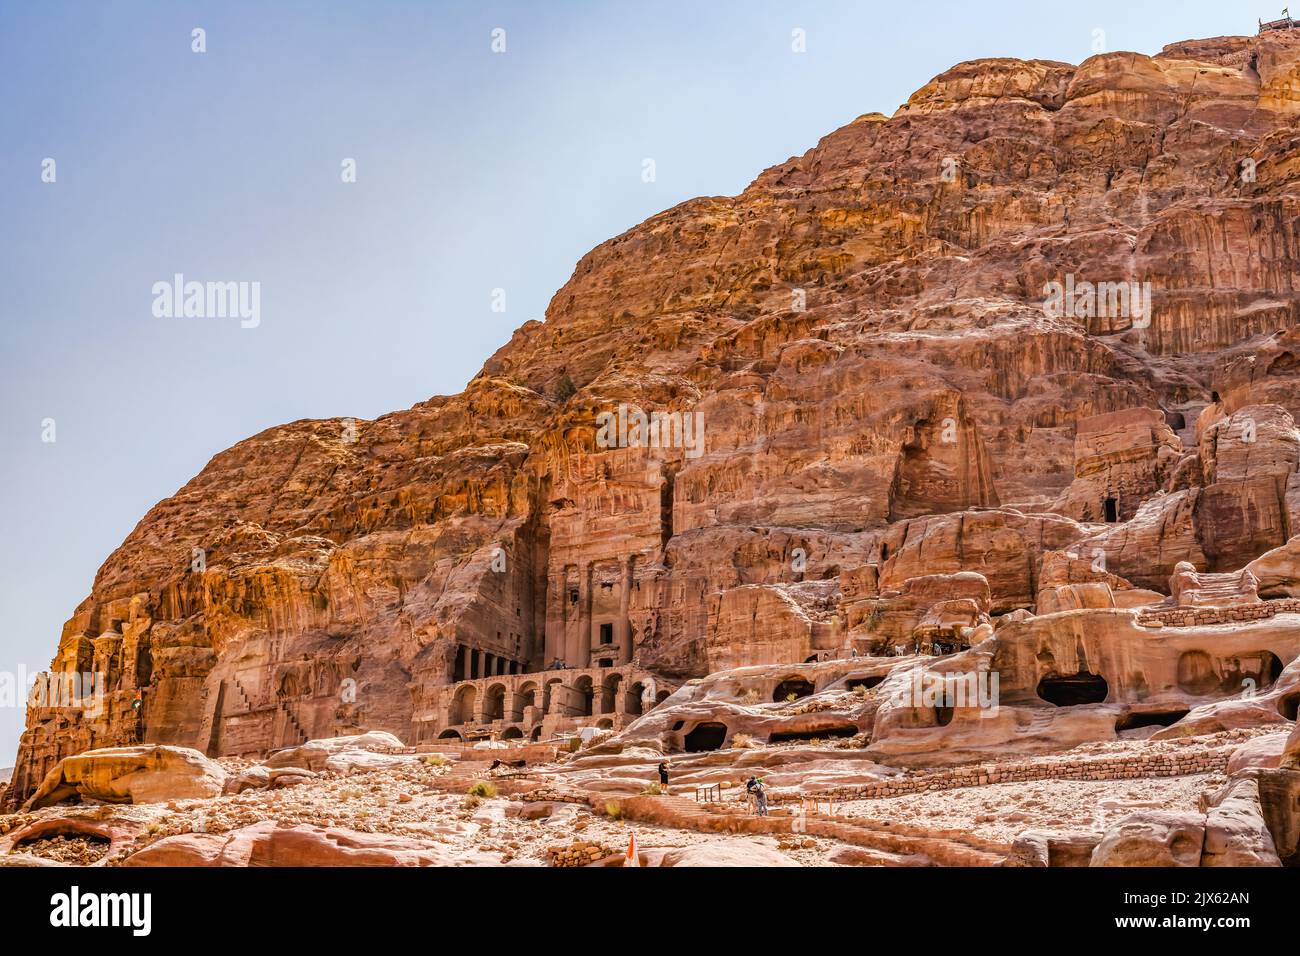 Royal Rock Tombs for Kings Petra Jordan Built by Nabataens in 200 BC to 400 AD Inside Tombs ceilings create coloful abstracts Stock Photo